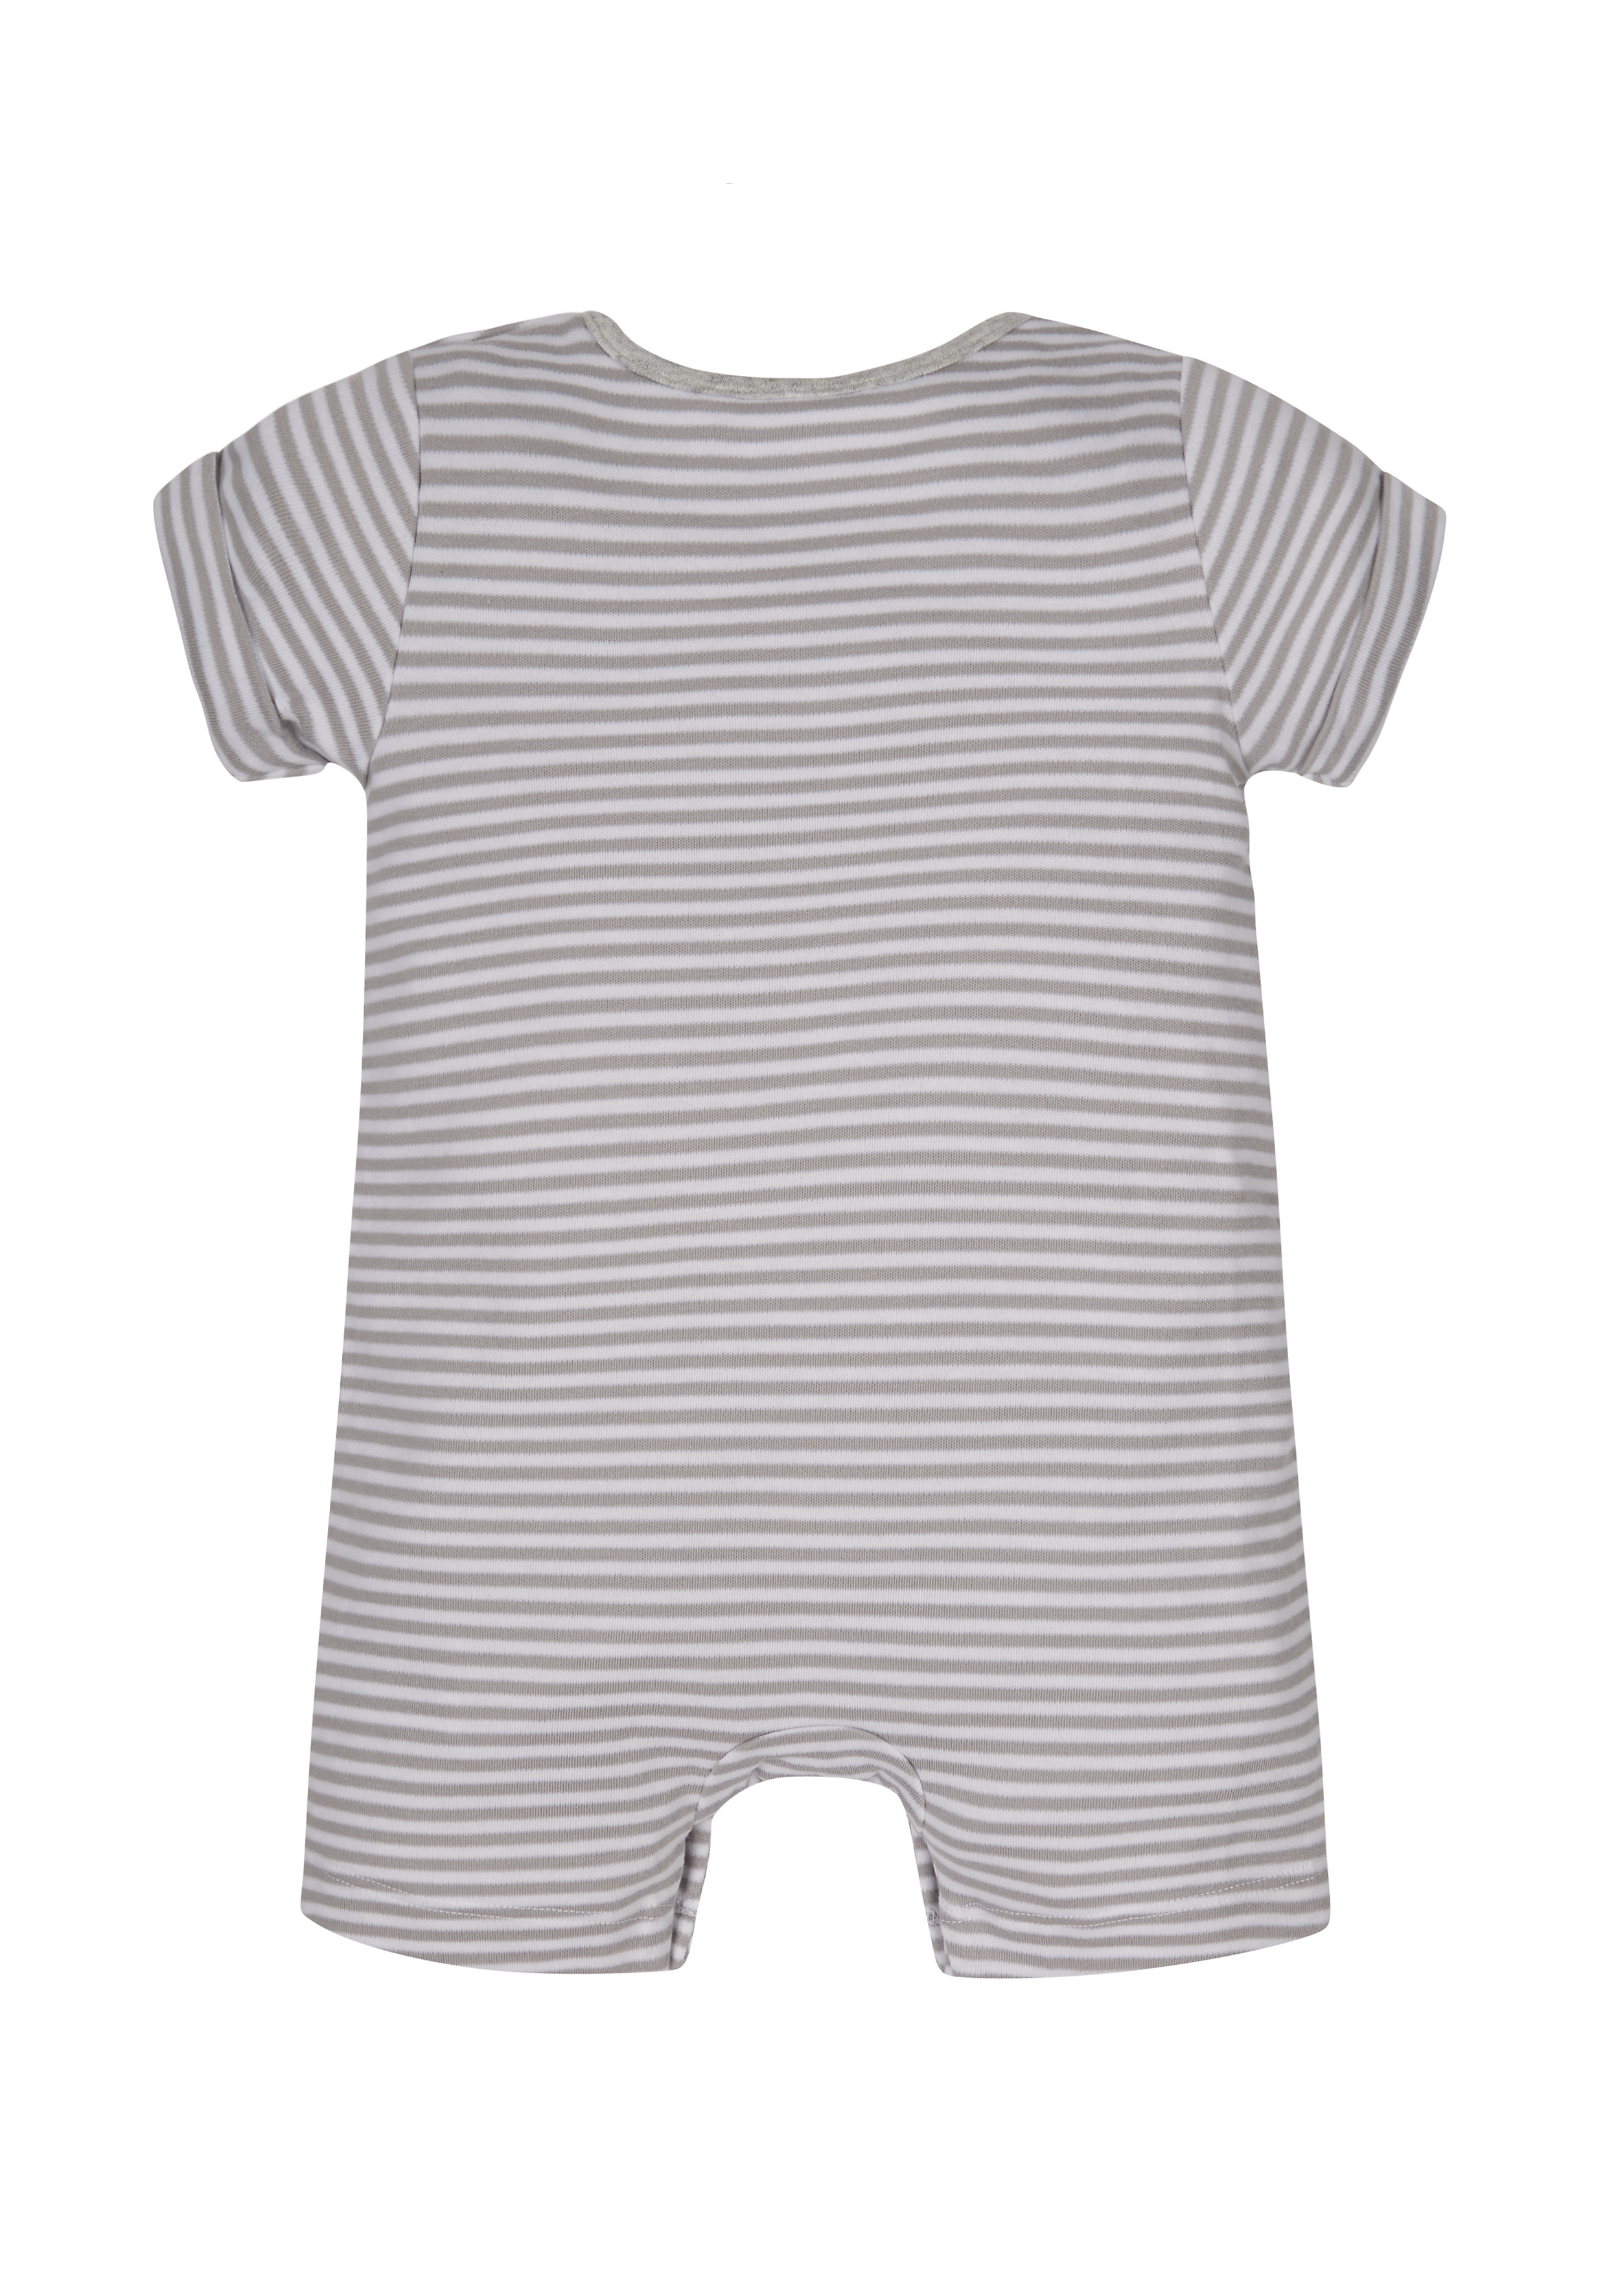 Mothercare | Unisex Text Print Striped Romper 1